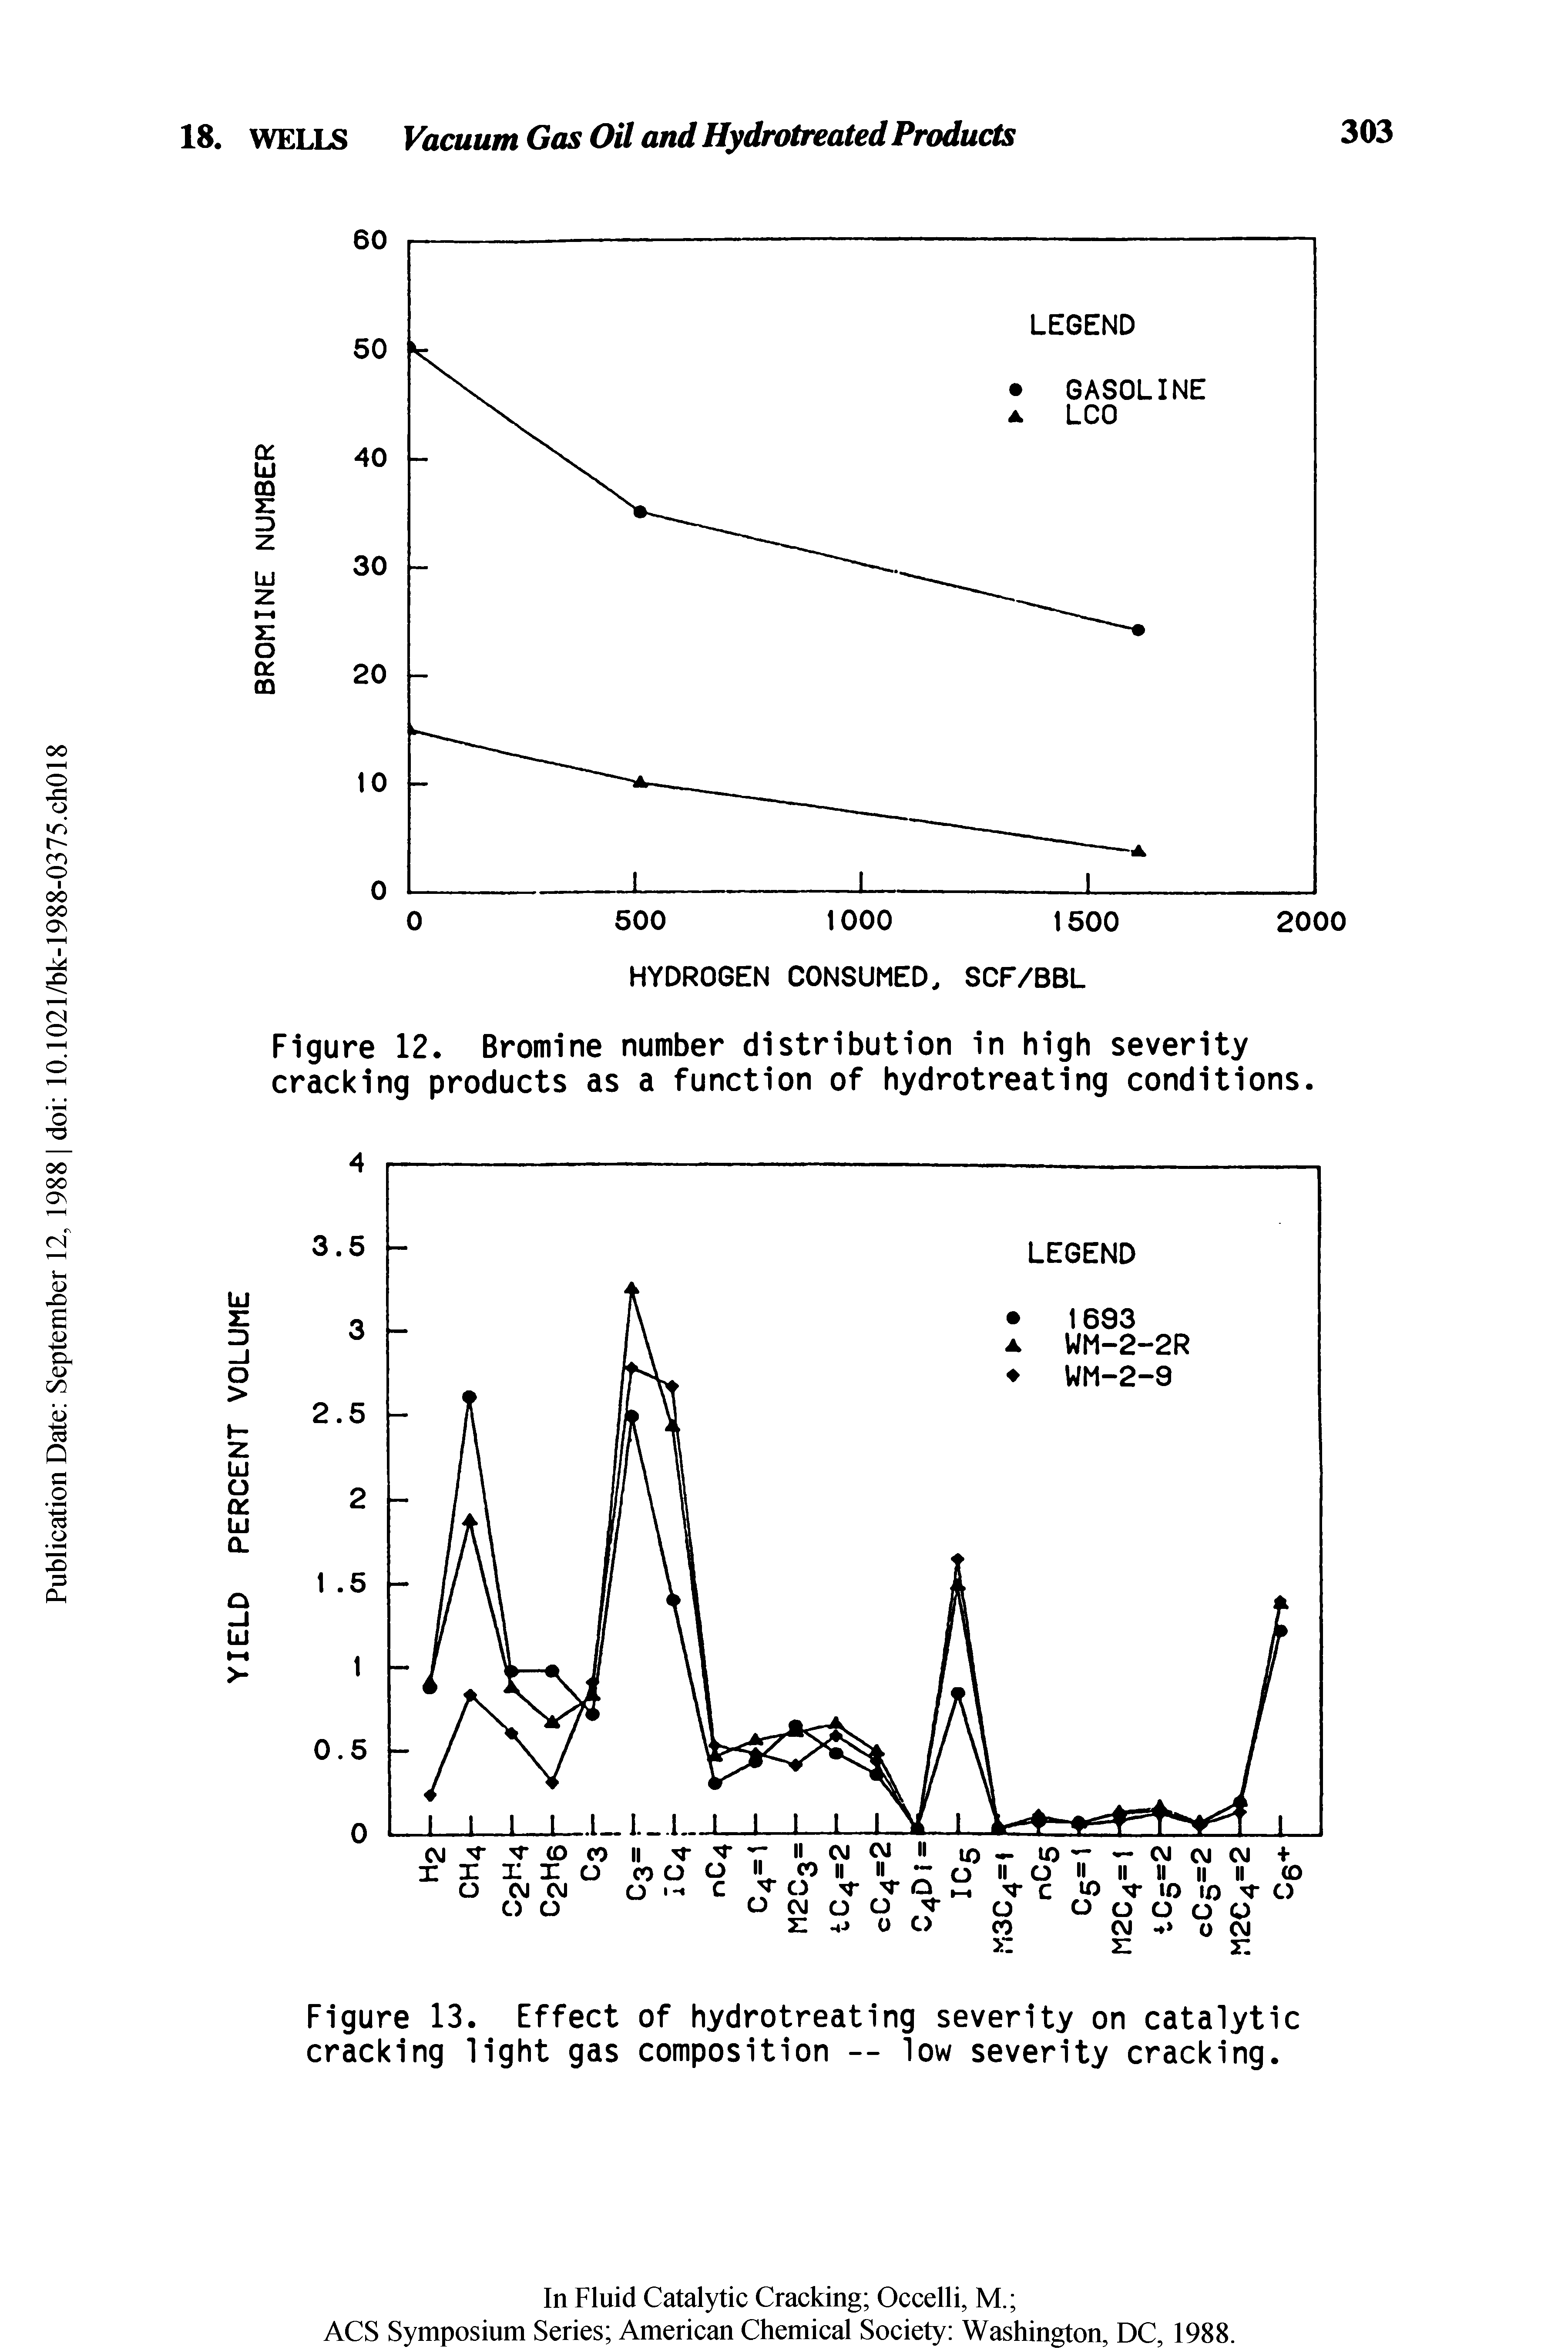 Figure 12. Bromine number distribution in high severity cracking products as a function of hydrotreating conditions.